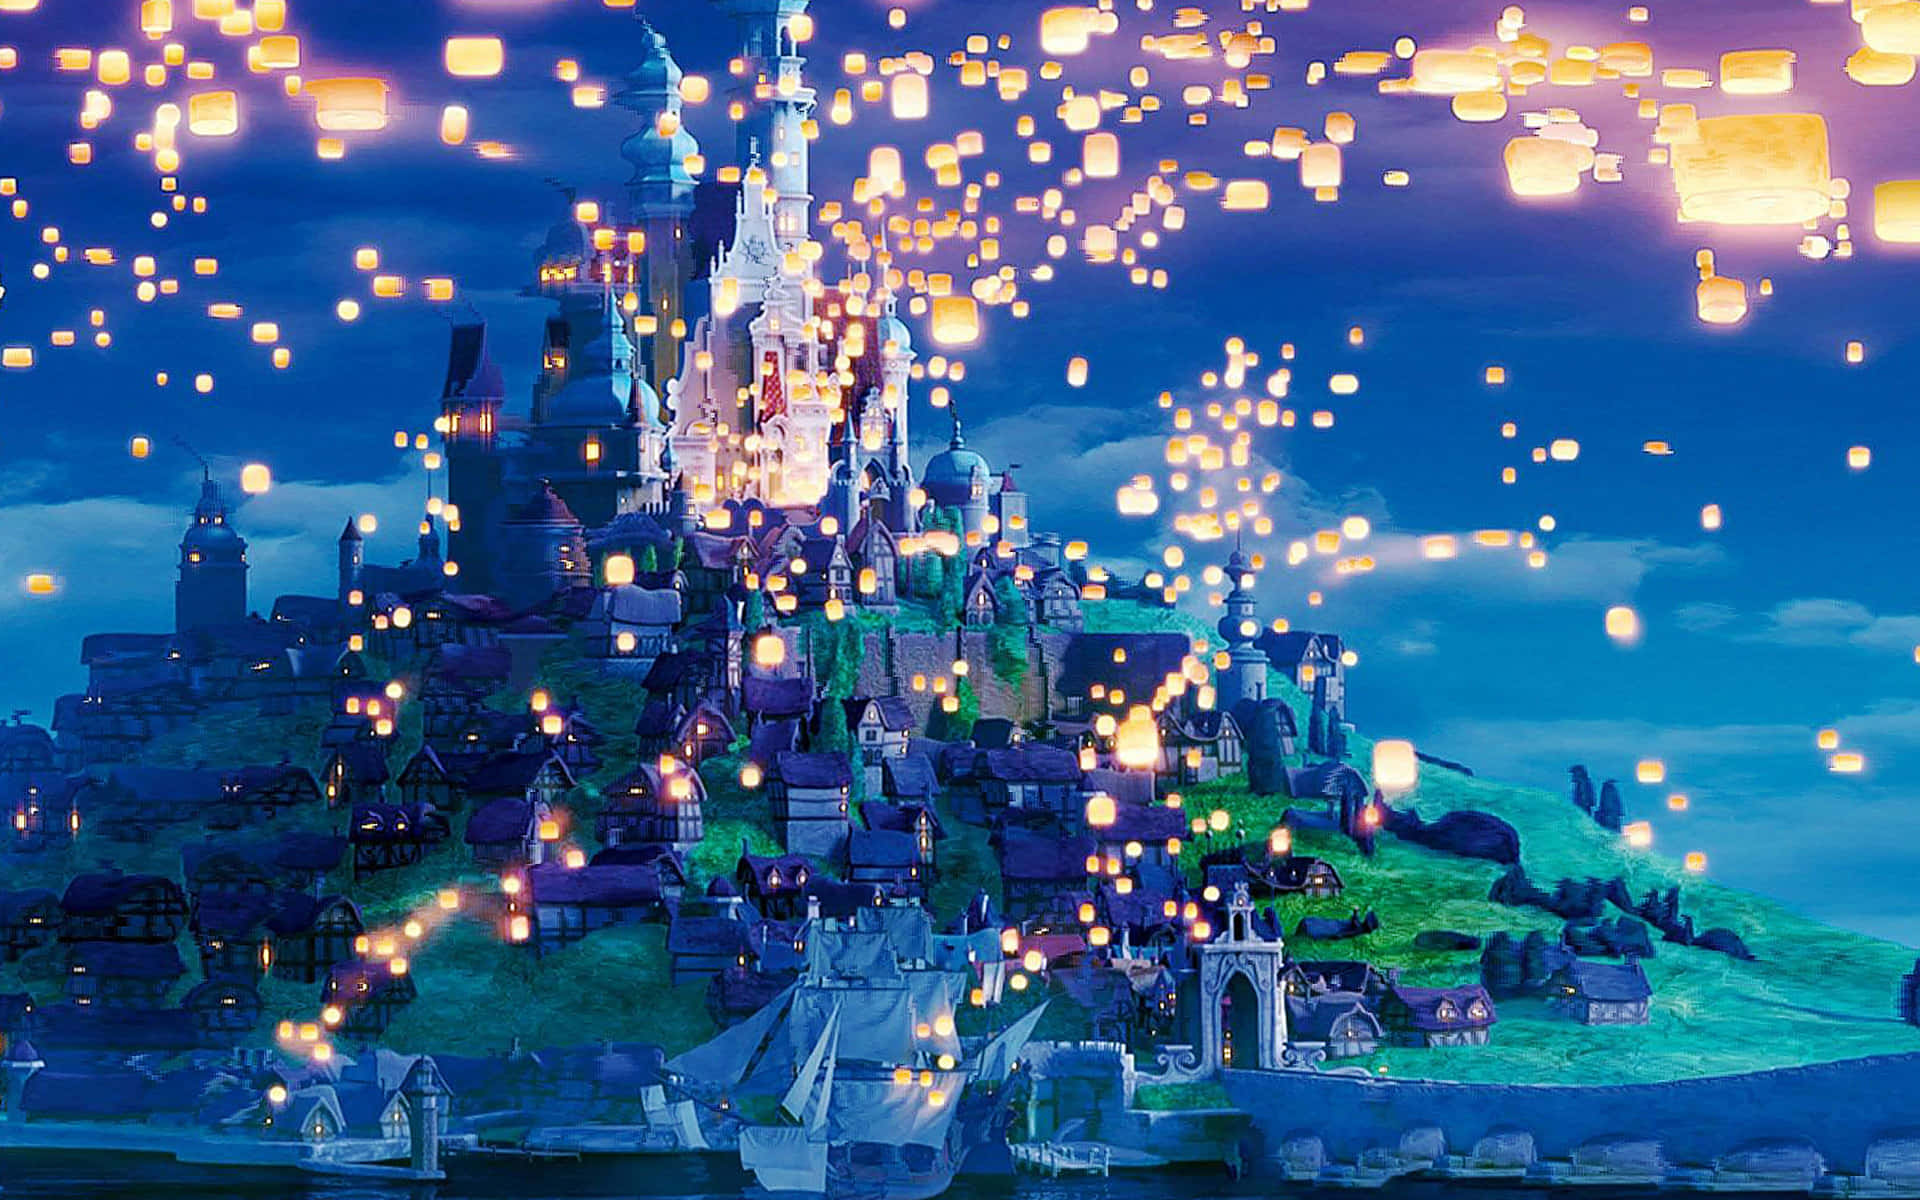 Step into the magical world of Disney in amazing 4K! Wallpaper